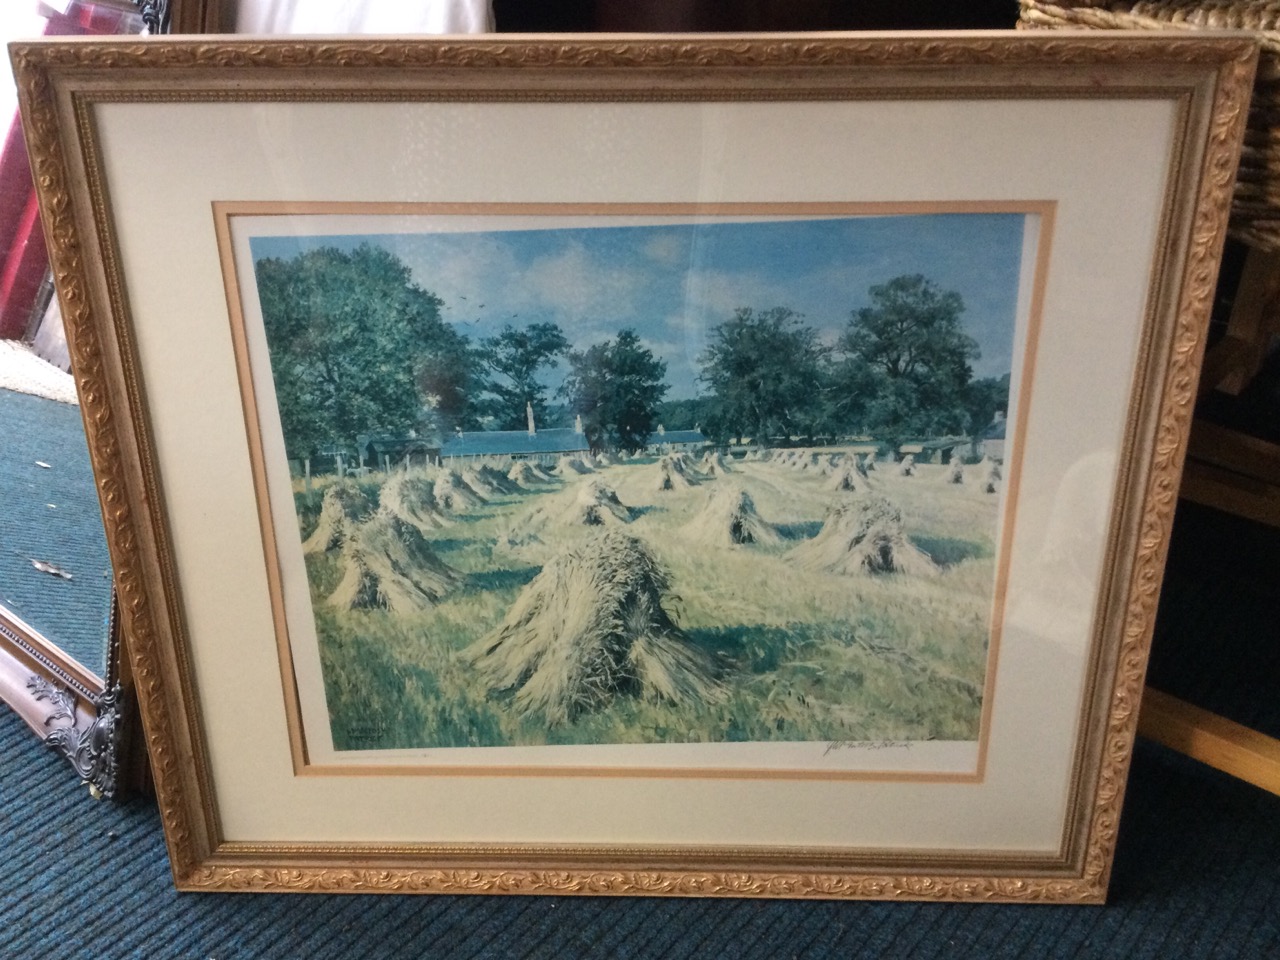 J McIntosh Patrick, lithographic print, cornfield landscape, signed and numbered in pencil on - Image 3 of 3